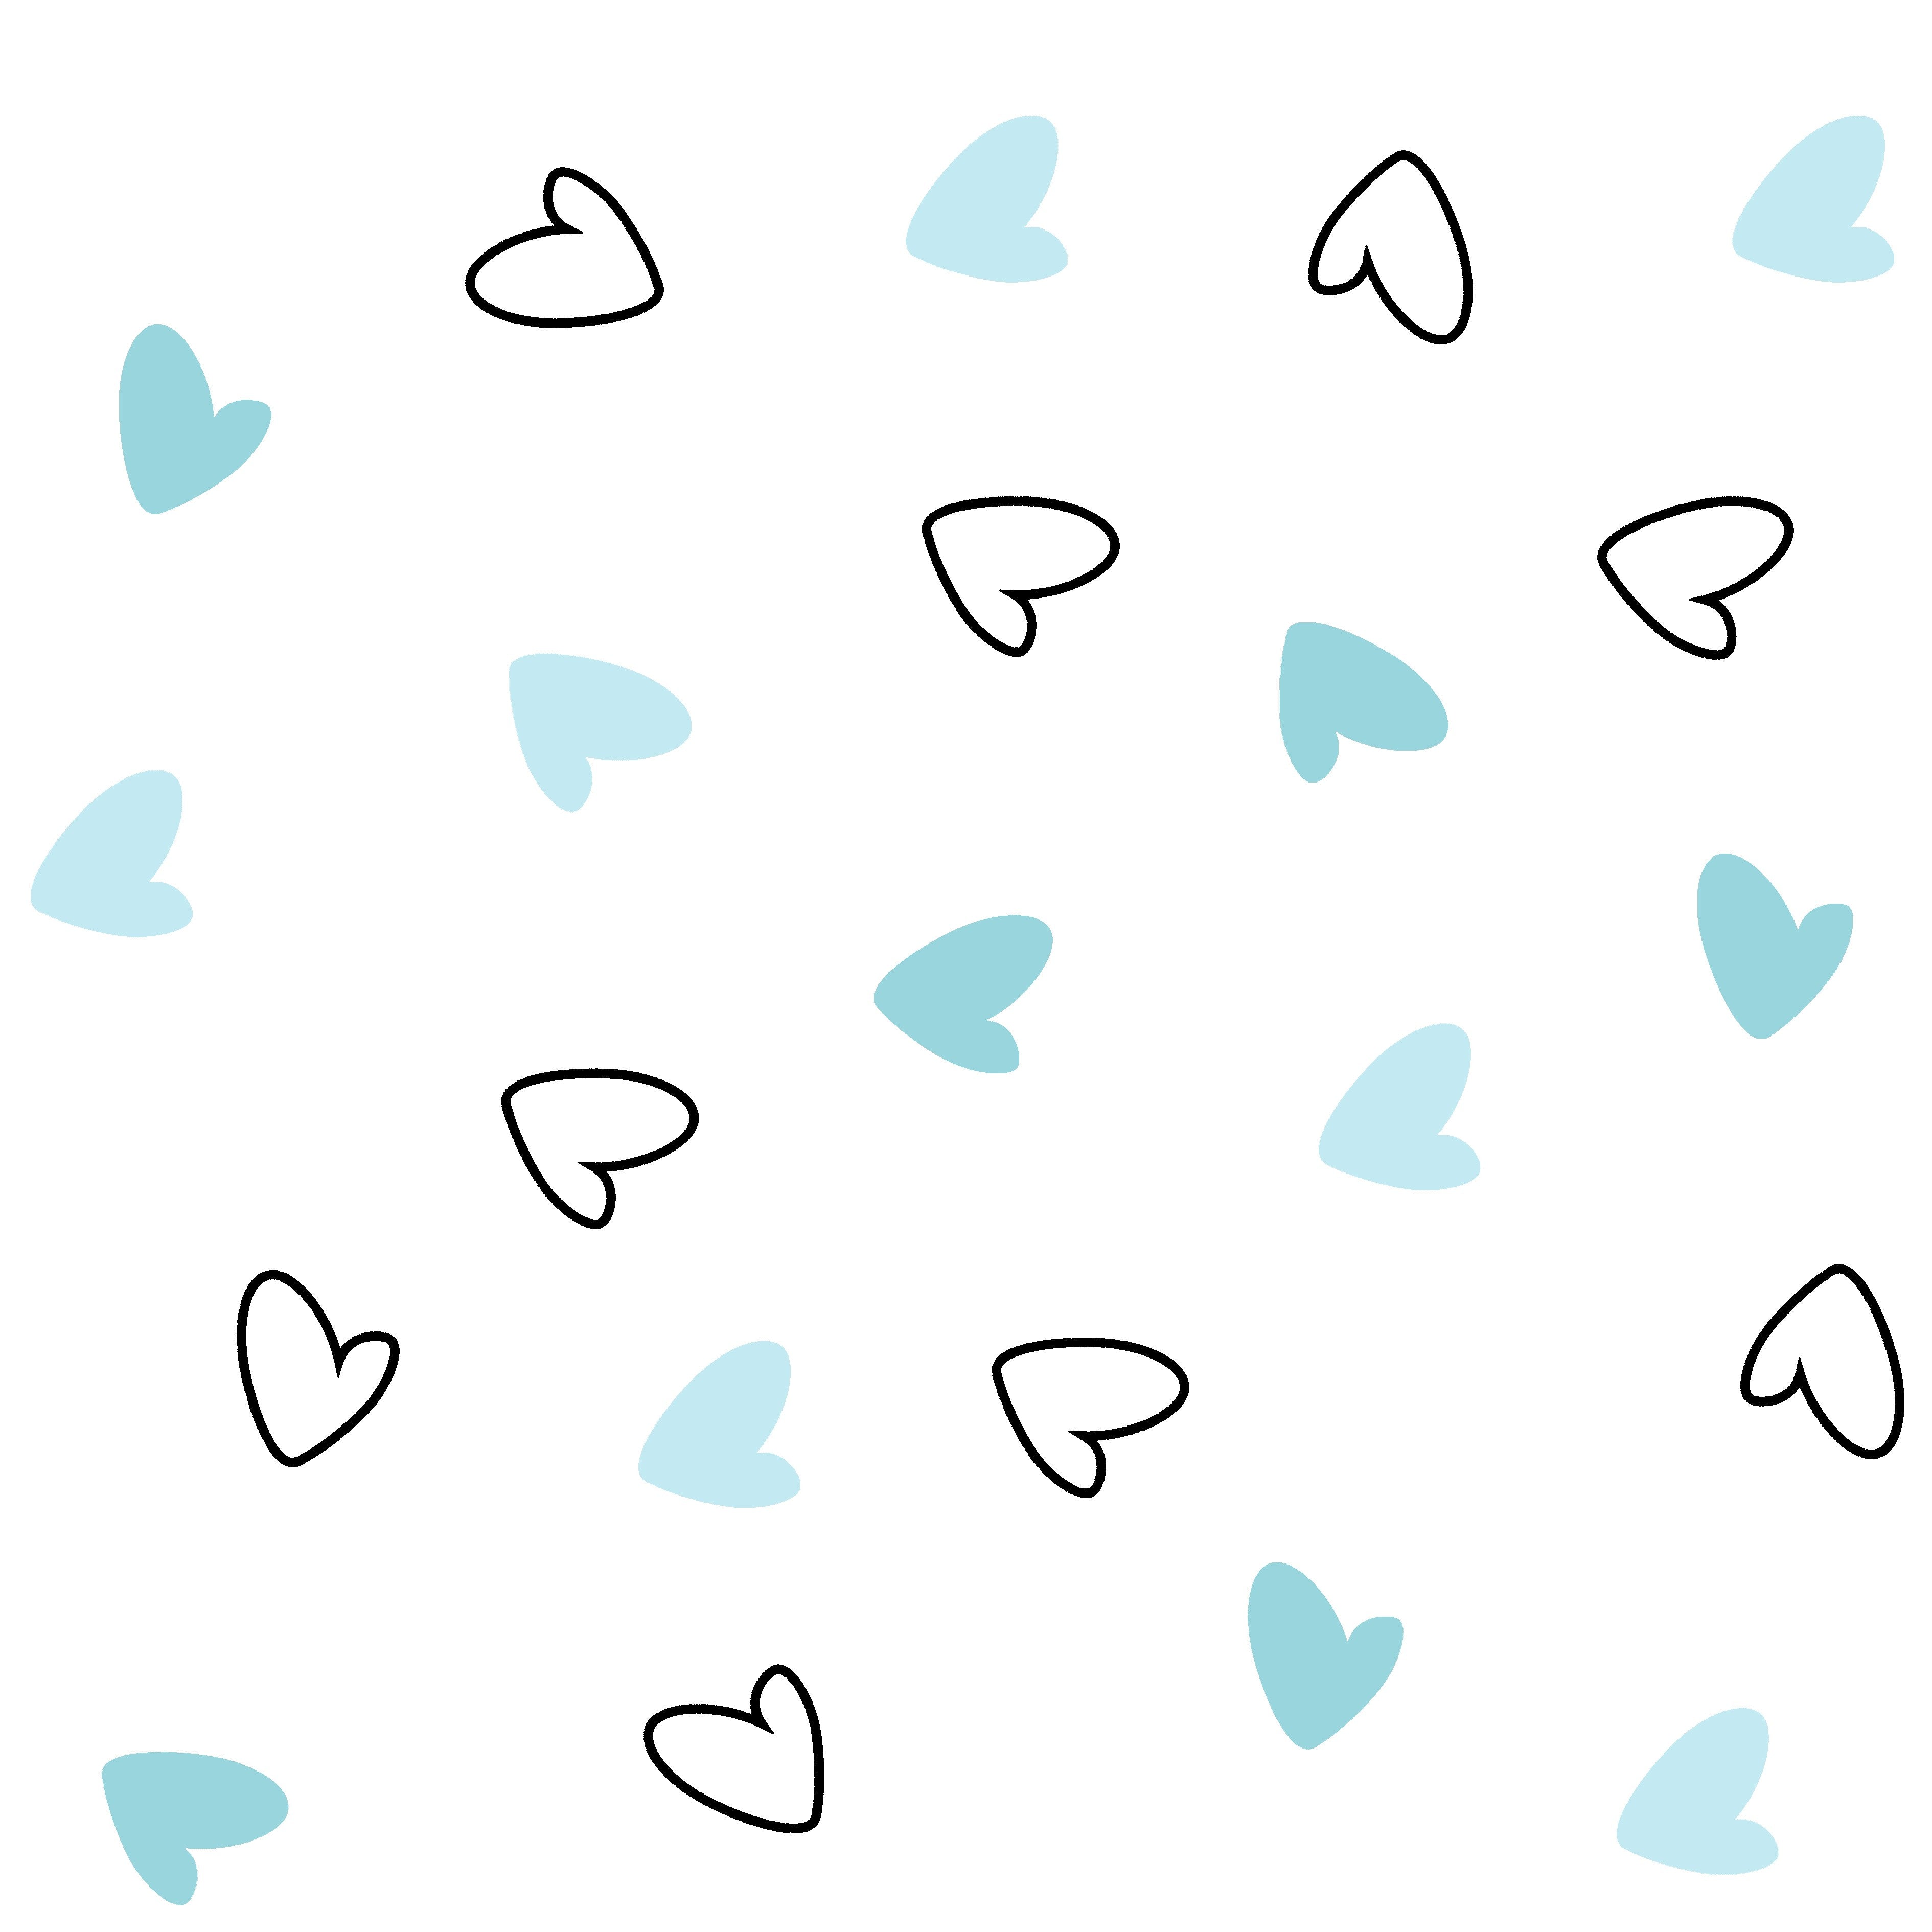 The White Cradle Flat Bed Sheet for Baby Cot & Mattress - Blue Hearts